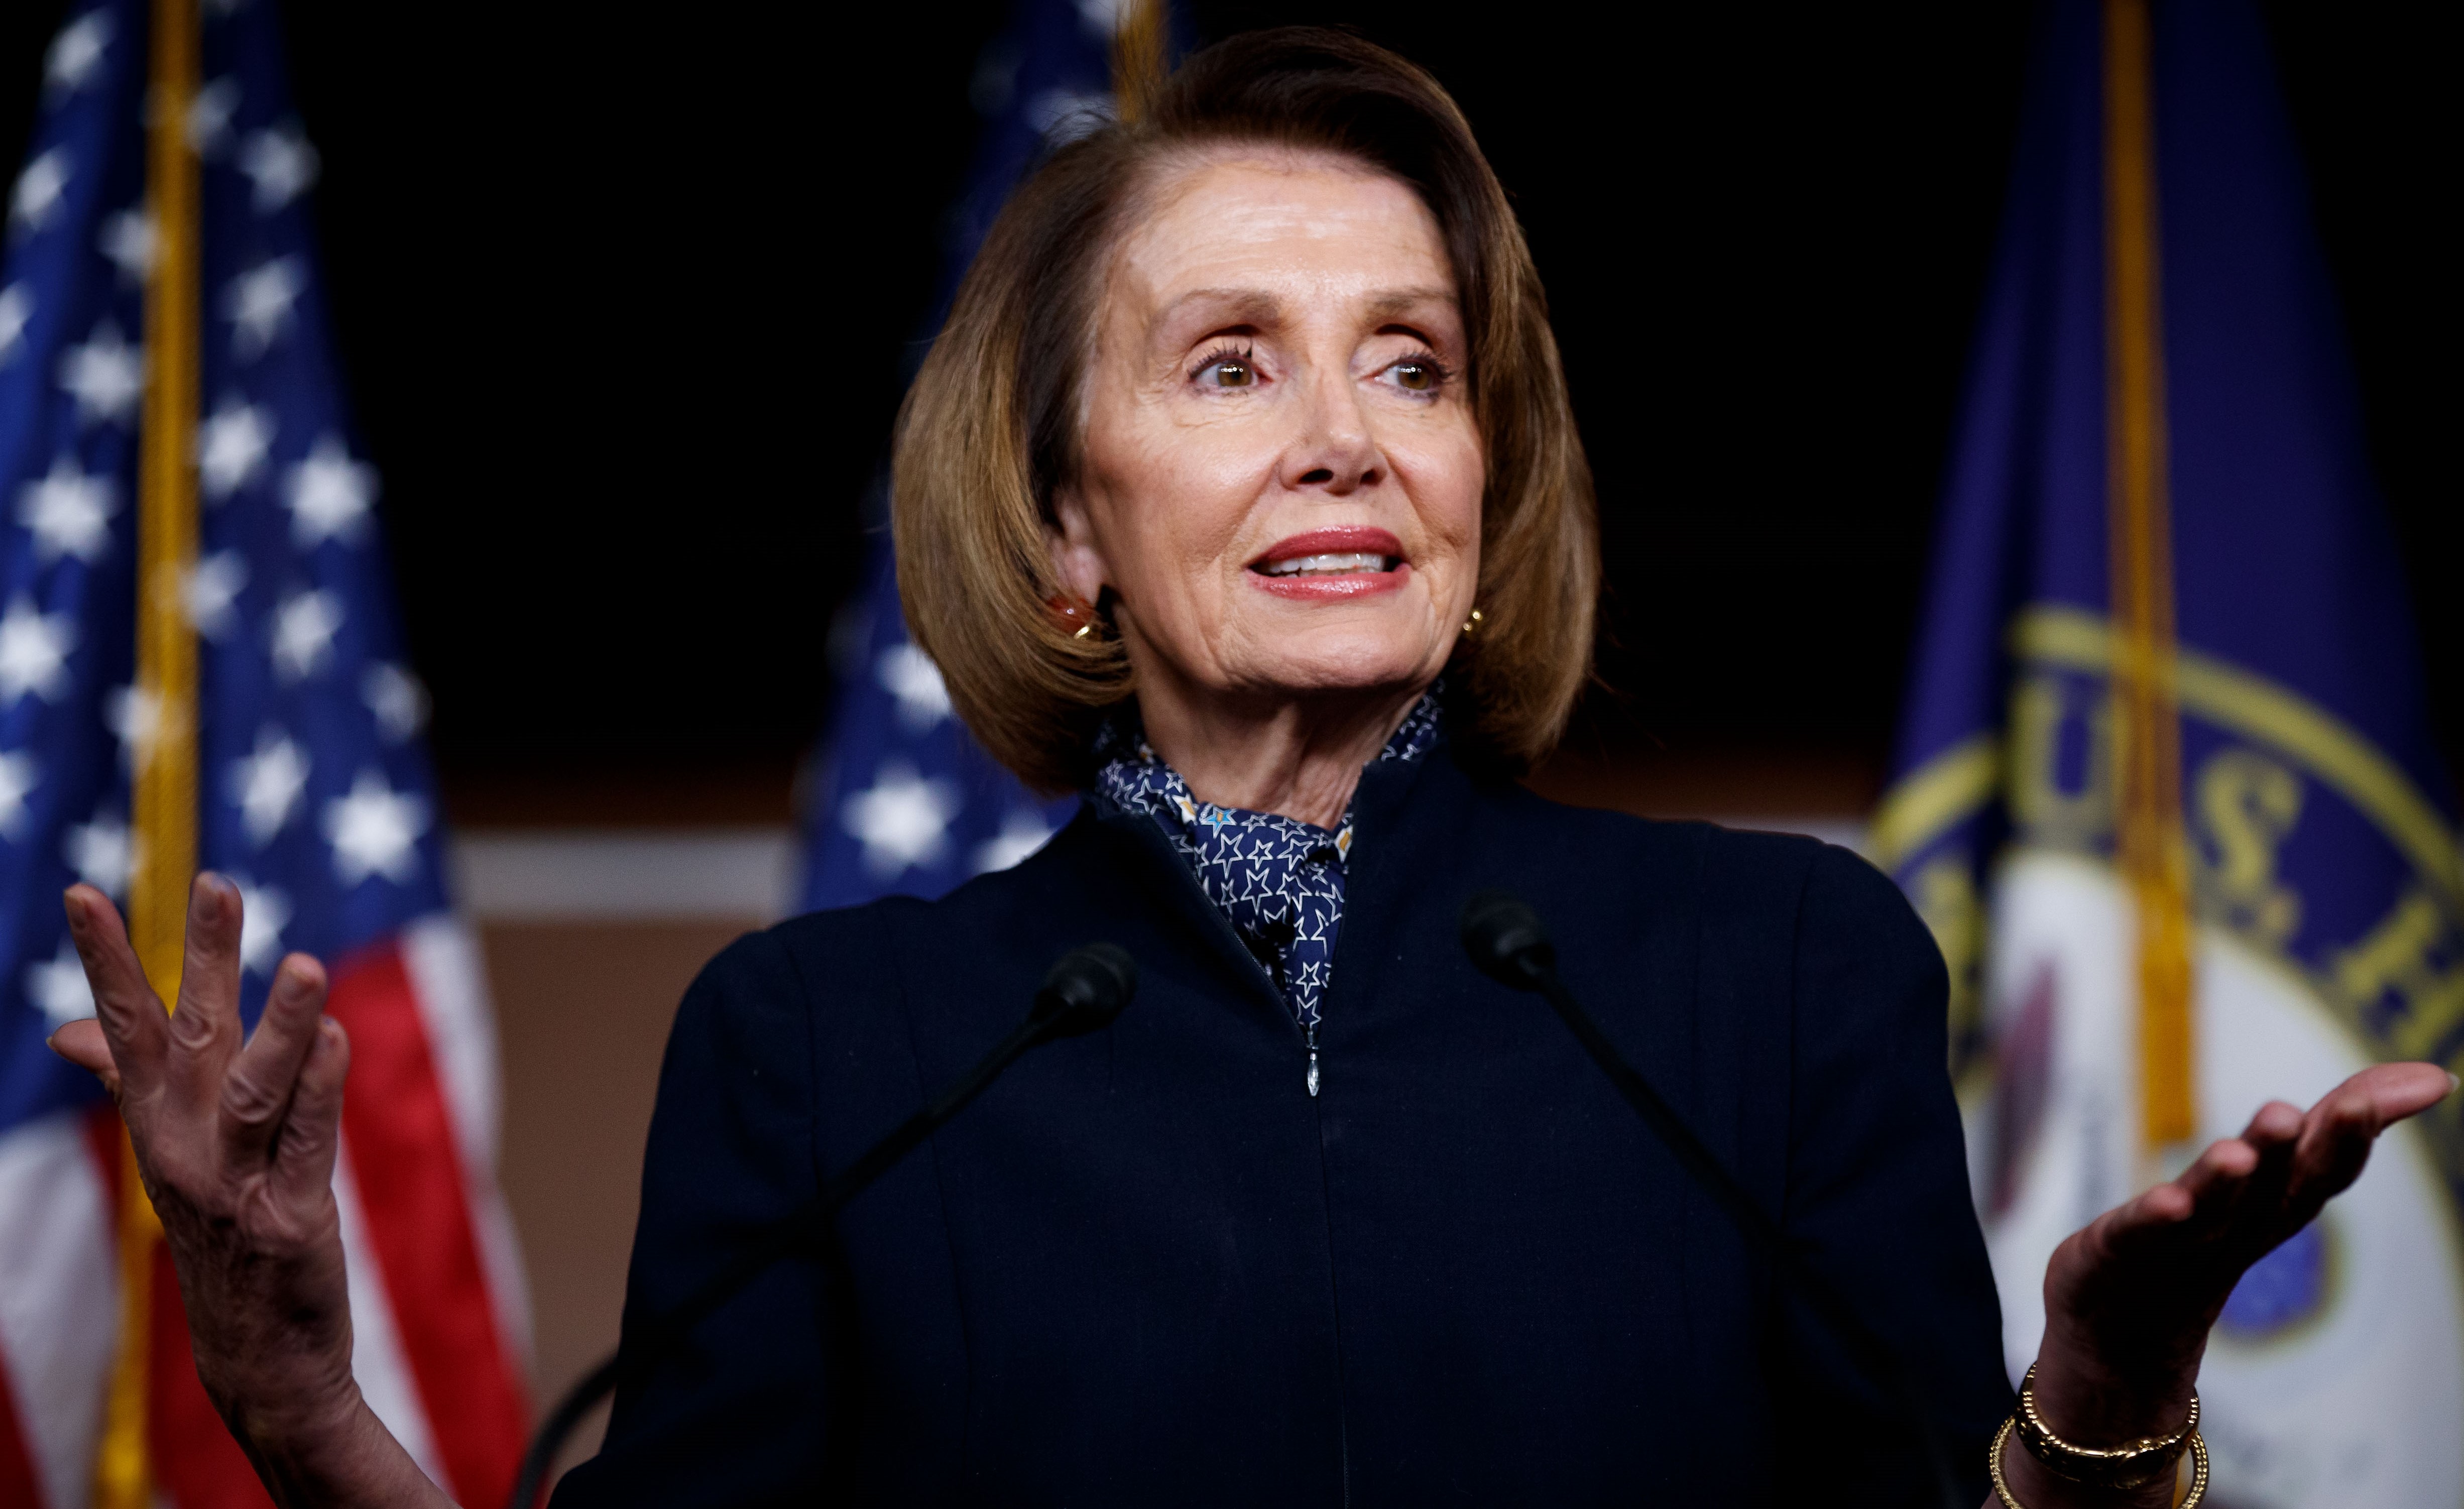 Pelosi begins closely-watched Asia tour in Singapore